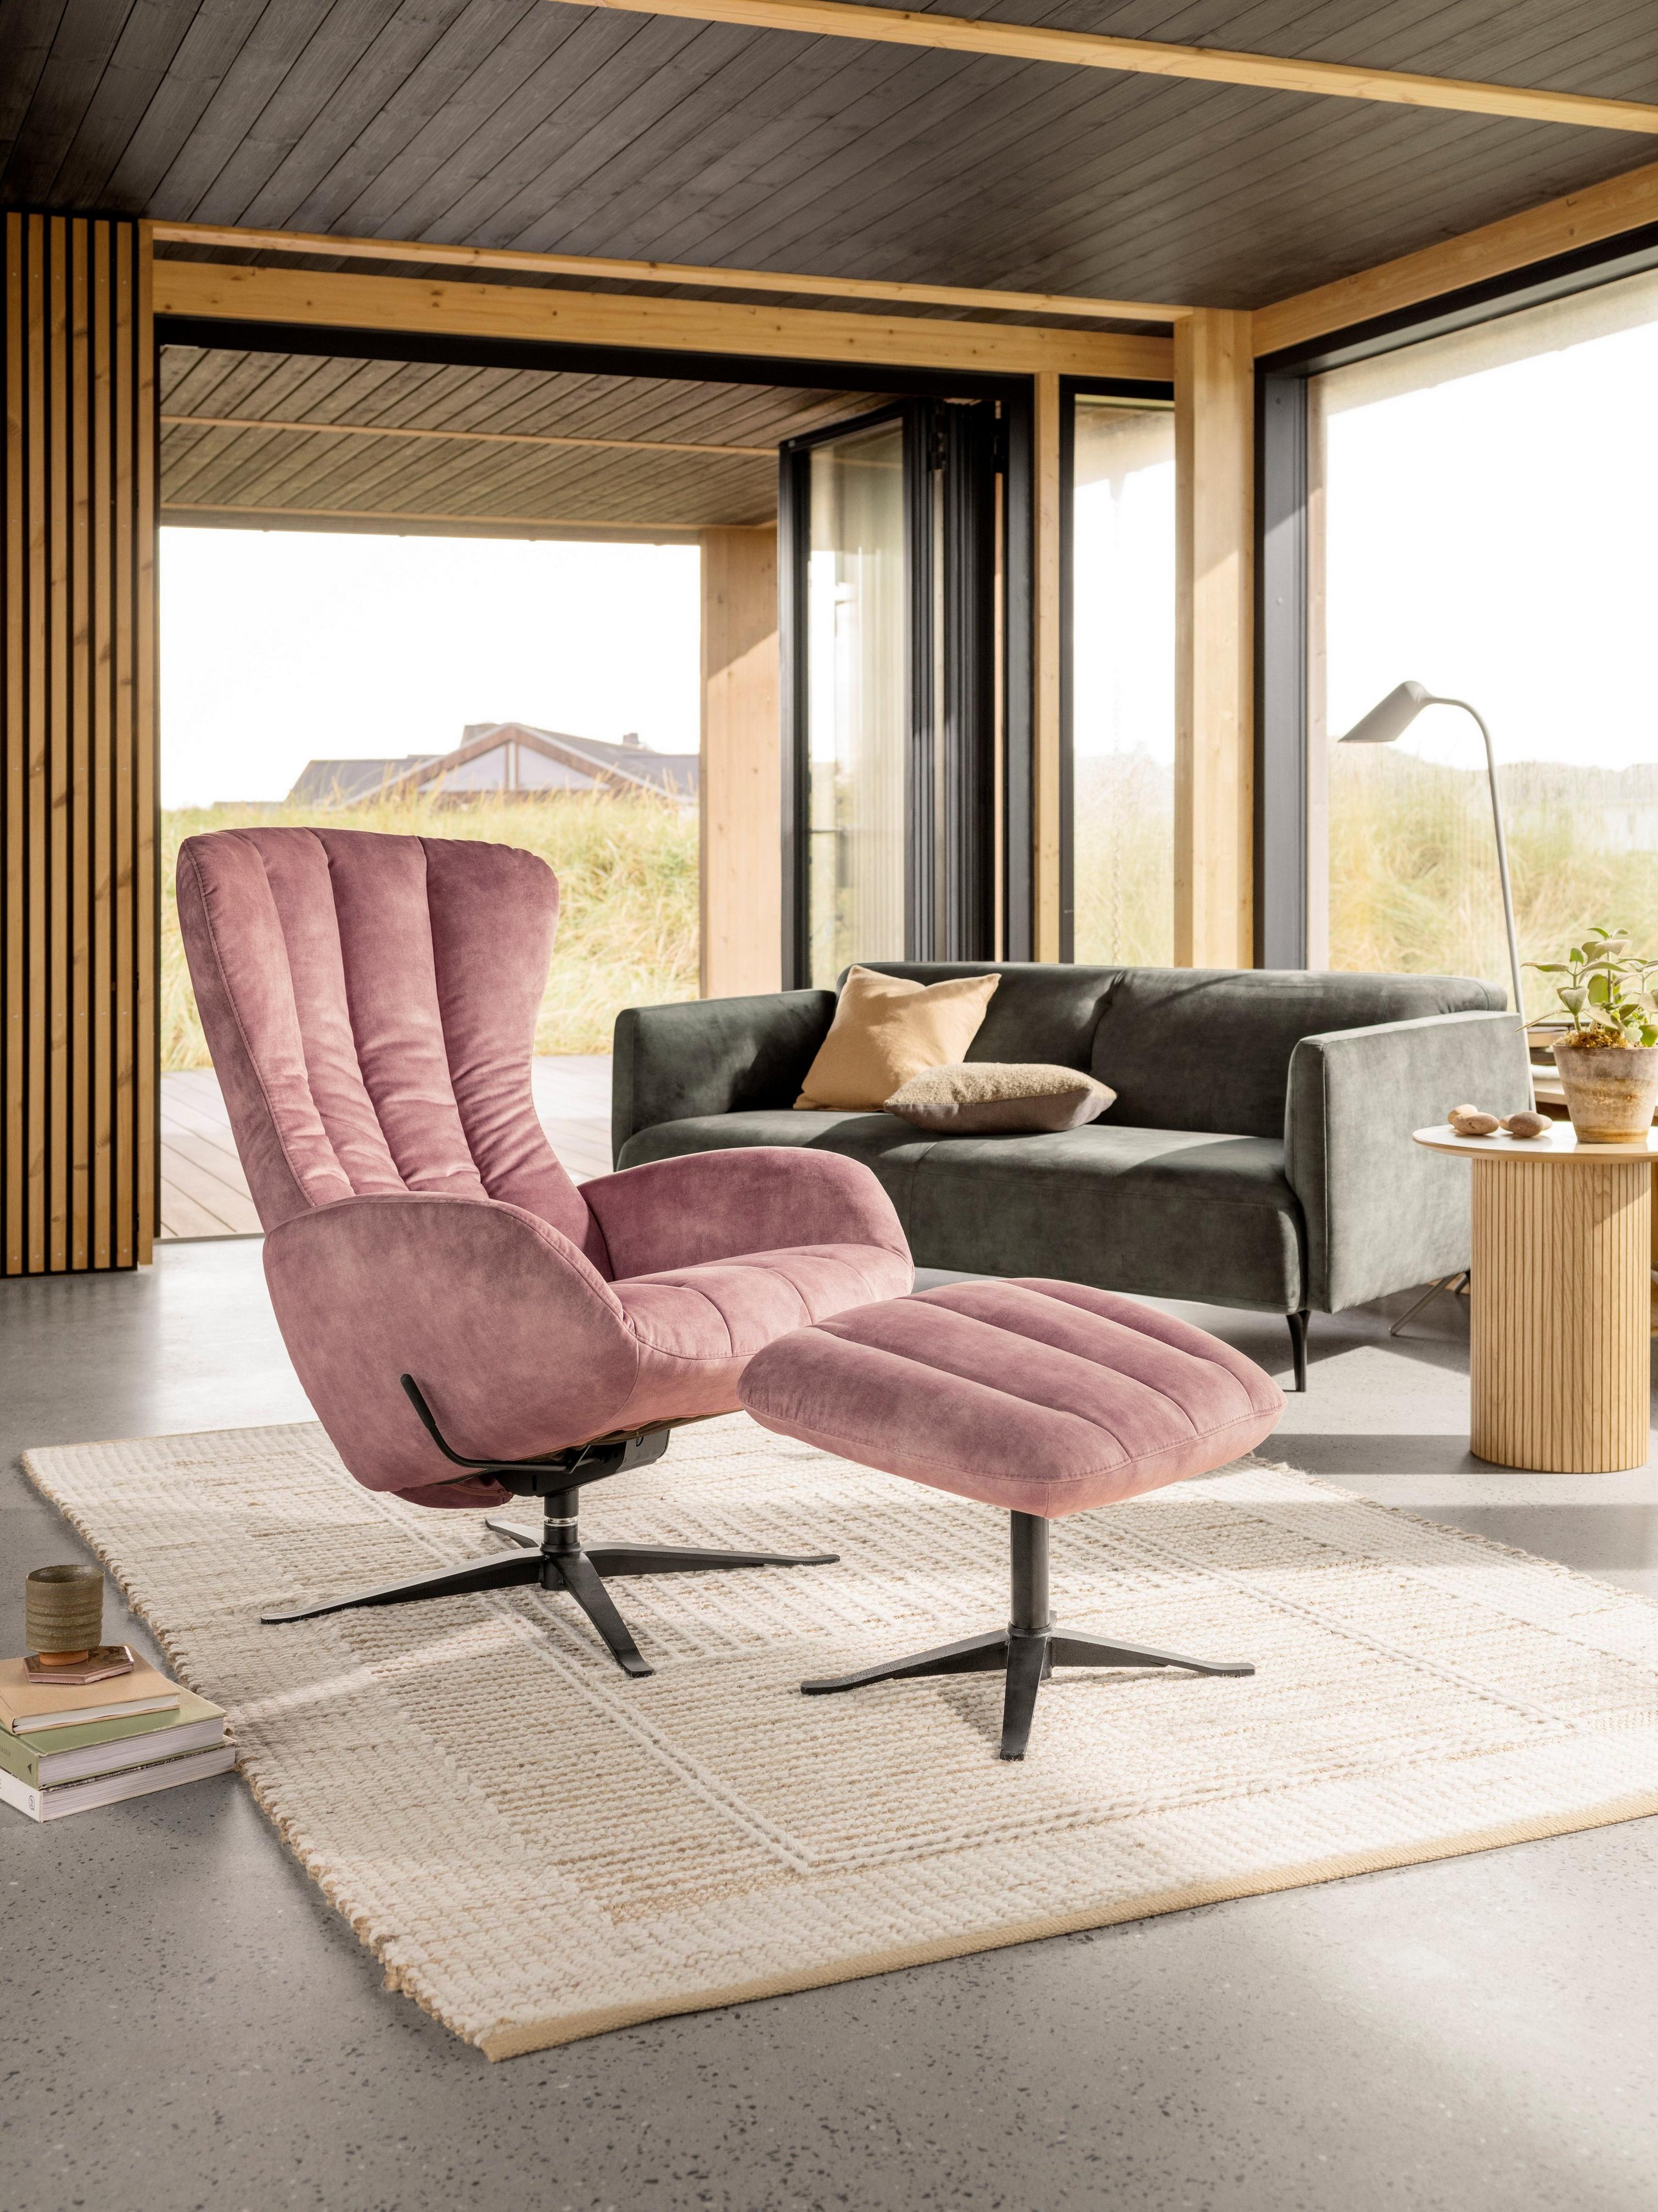 Light-filled living space featuring the Tilburg living chair and matching footstool upholstered in dusty rose Ravello fabric.